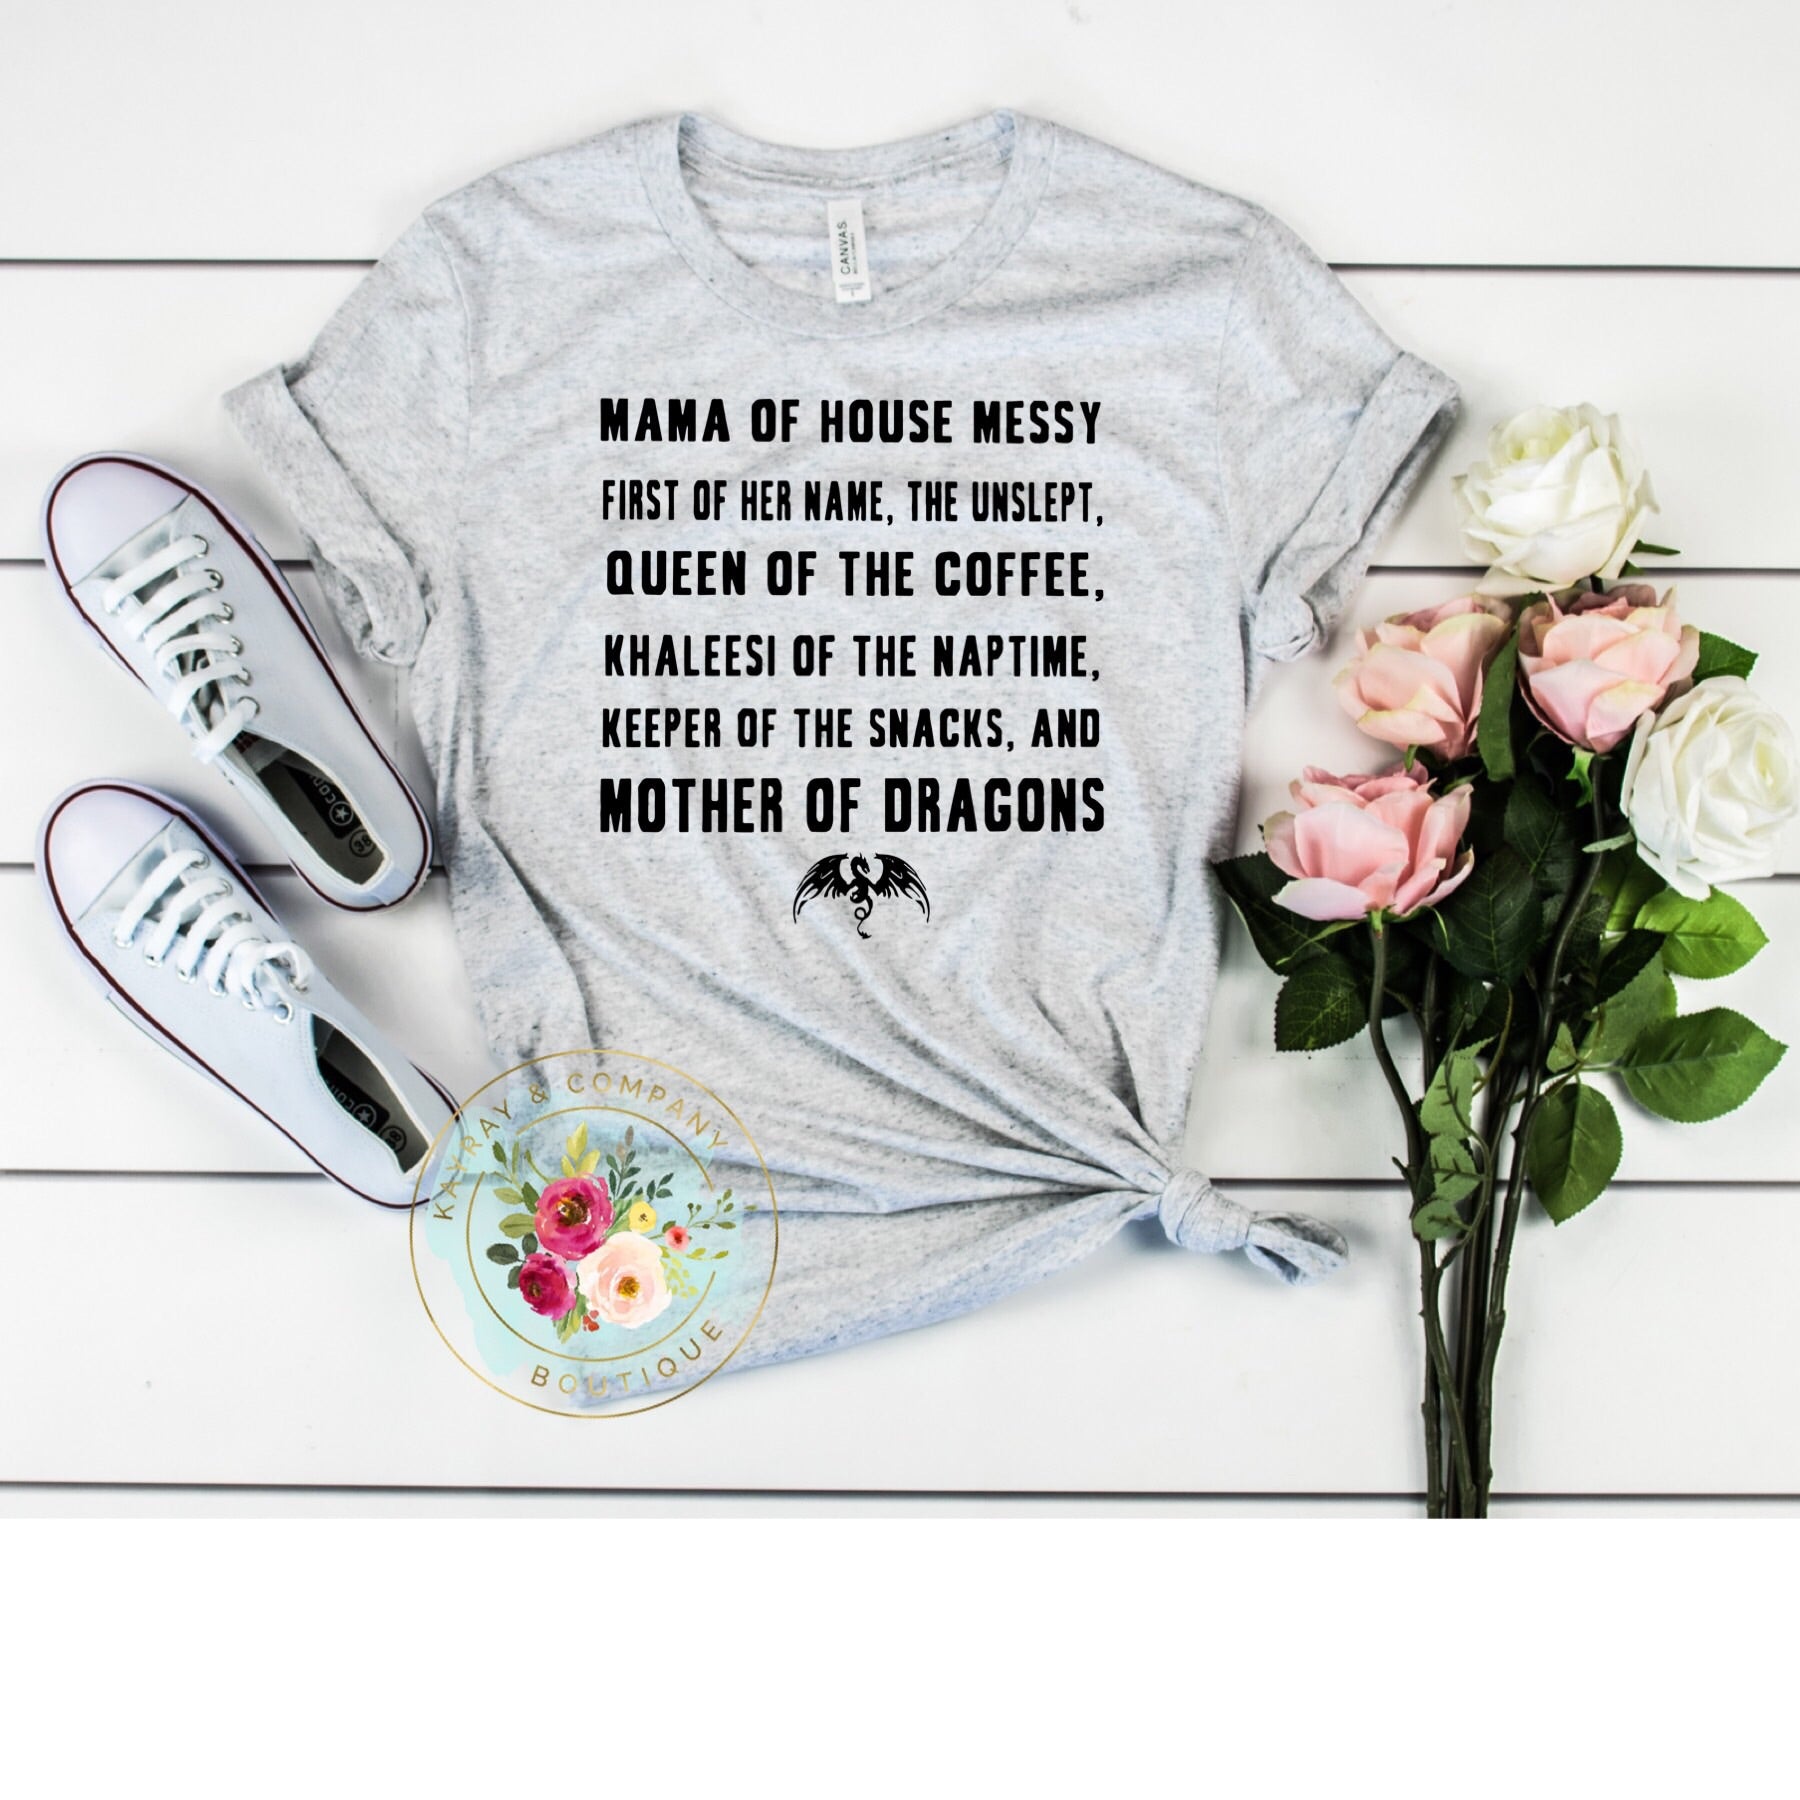 Mama of house messy first of her name, the unslept, queen of the coffee, khaleesi of the naptime, keeper of the snacks, and mother of dragons T-shirt